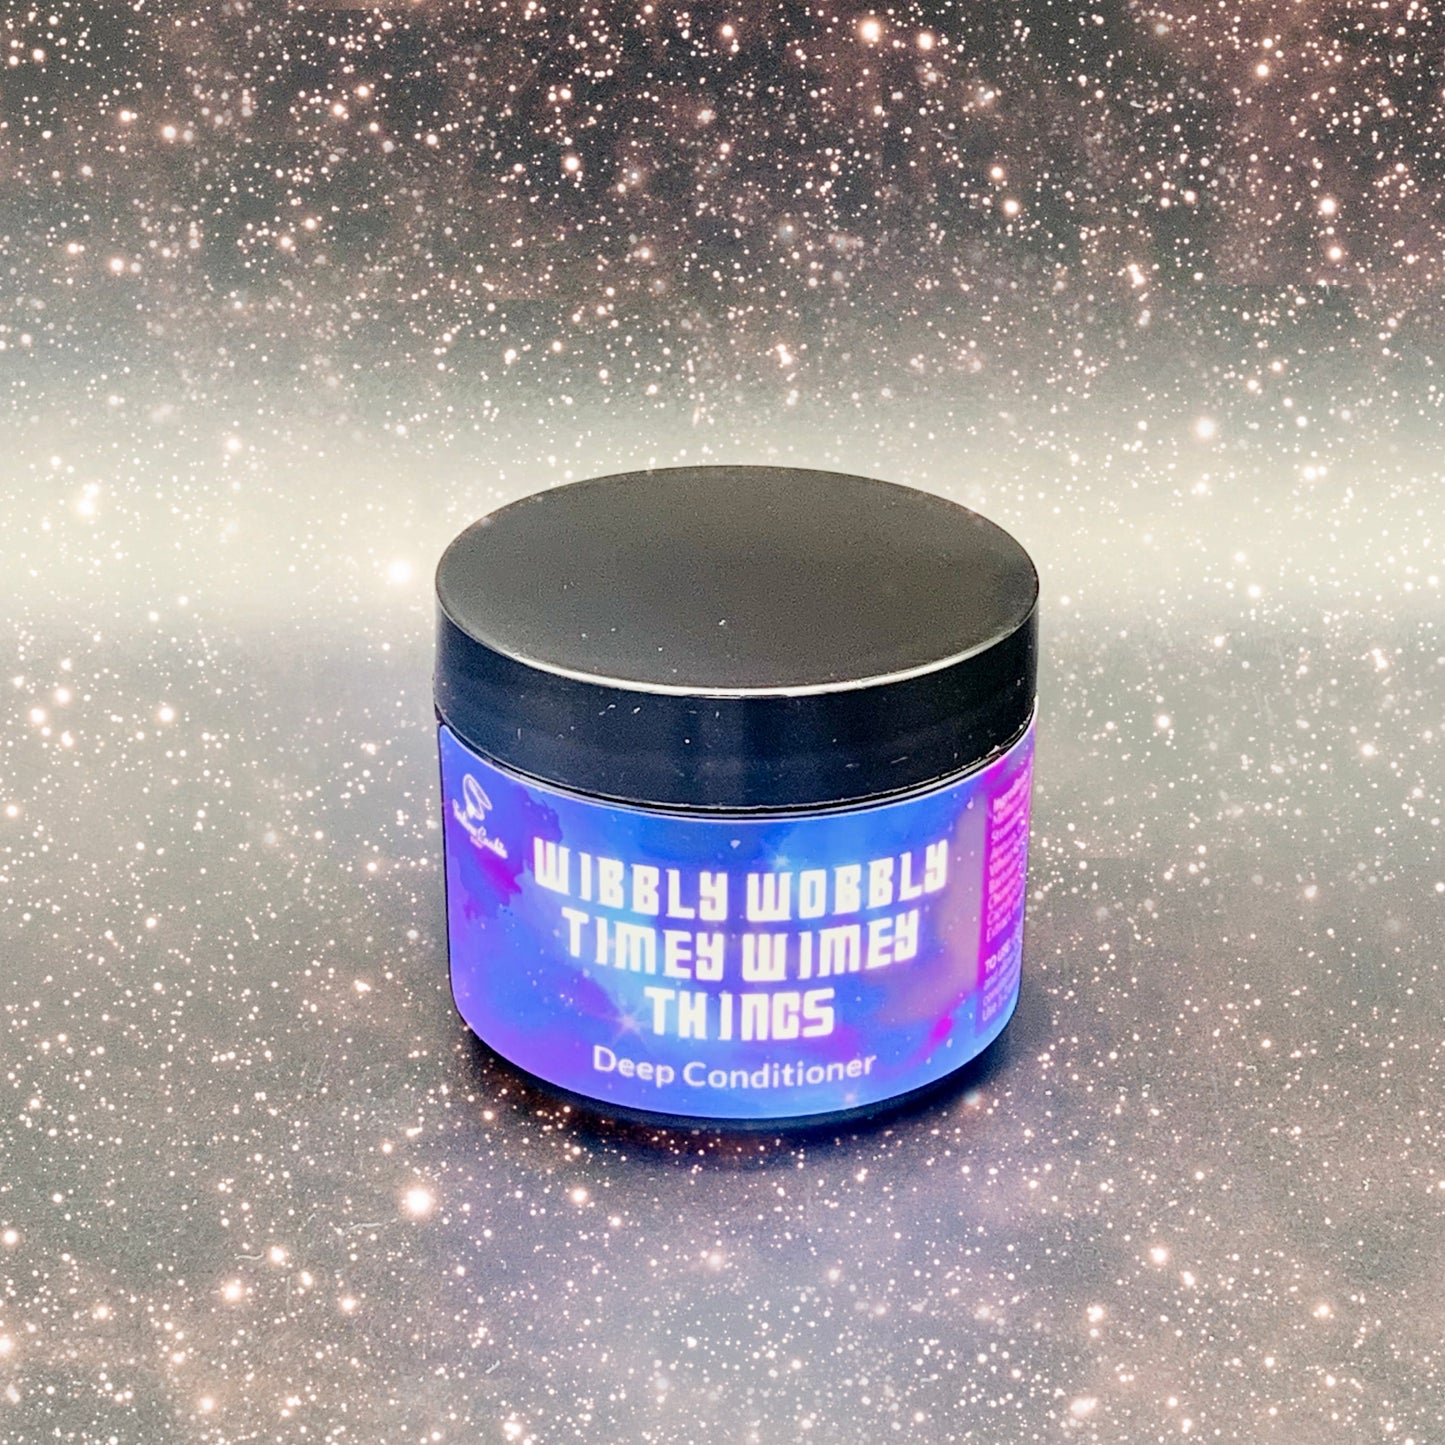 WIBBLY WOBBLY TIMEY WIMEY THINGS Deep Conditioner